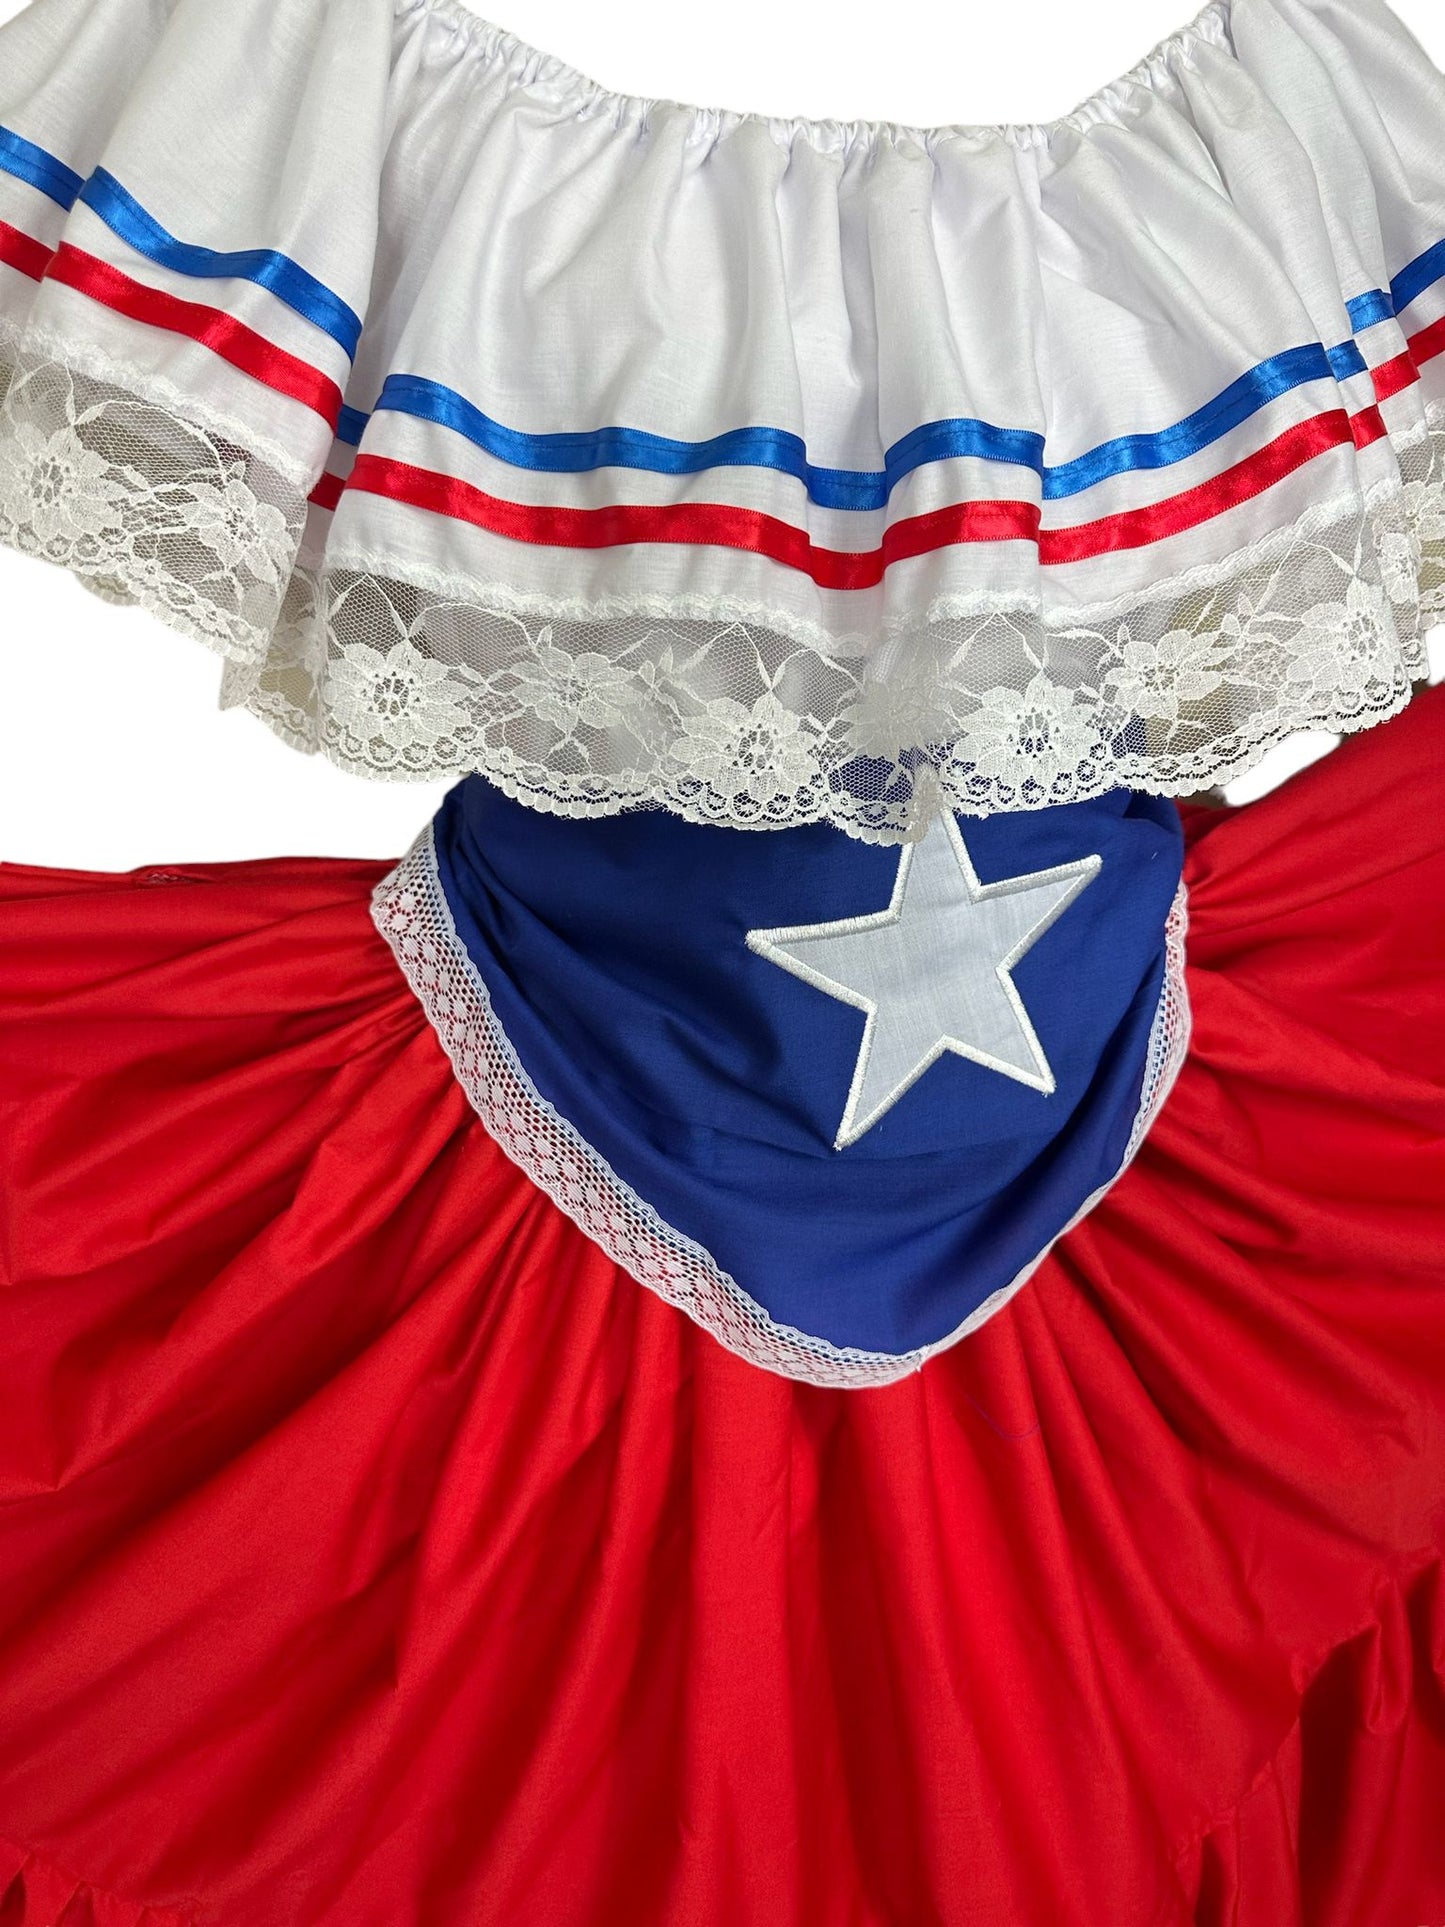 Puerto Rican Traditional Dress - Wide Red Flag Style